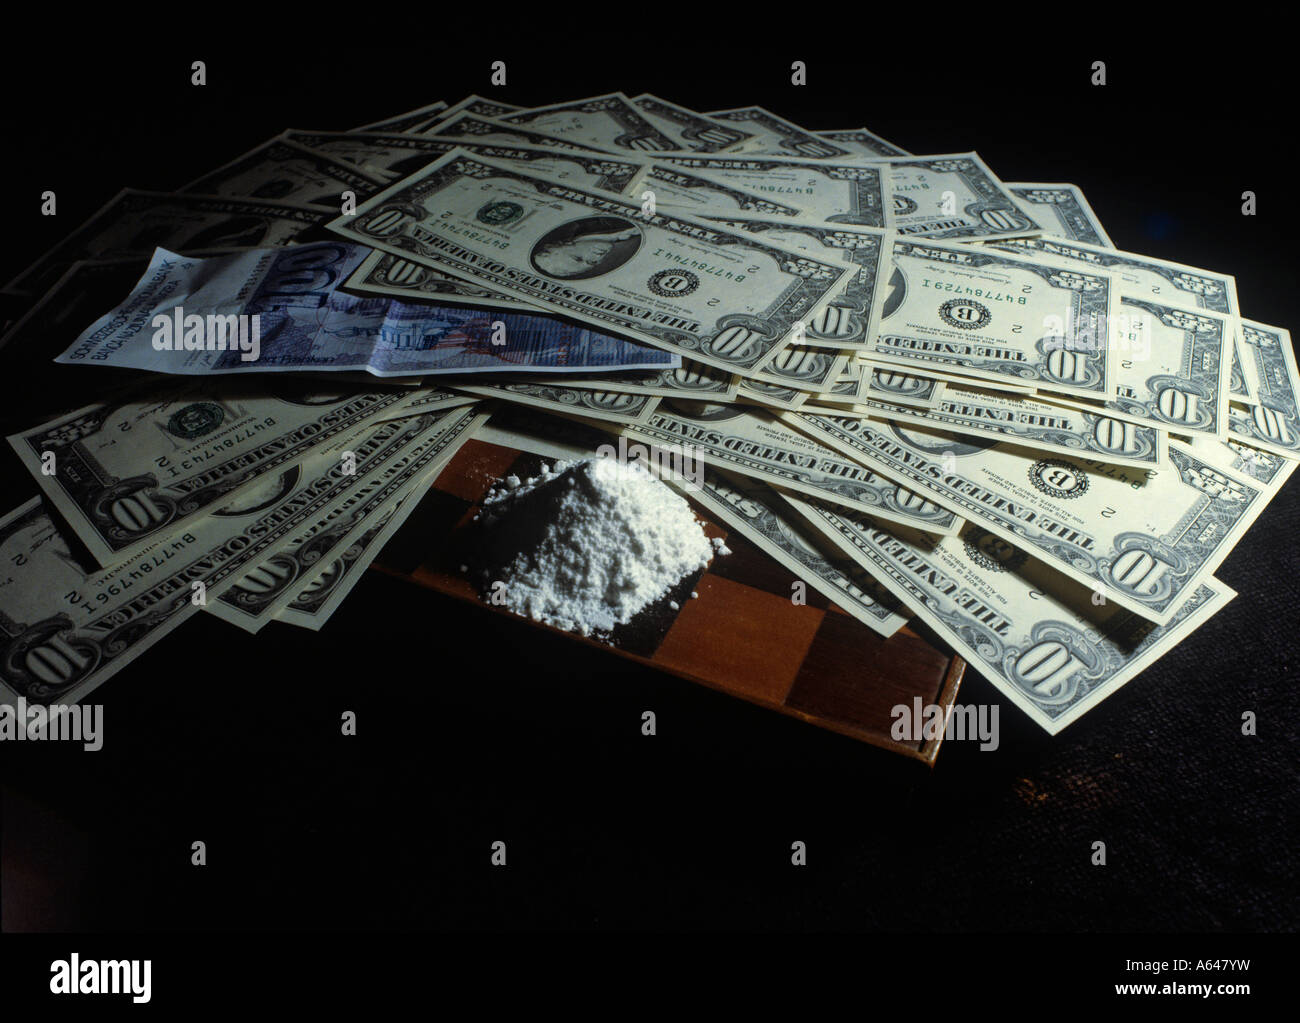 dollar bills and cocaine or heroine editorial use only Stock Photo